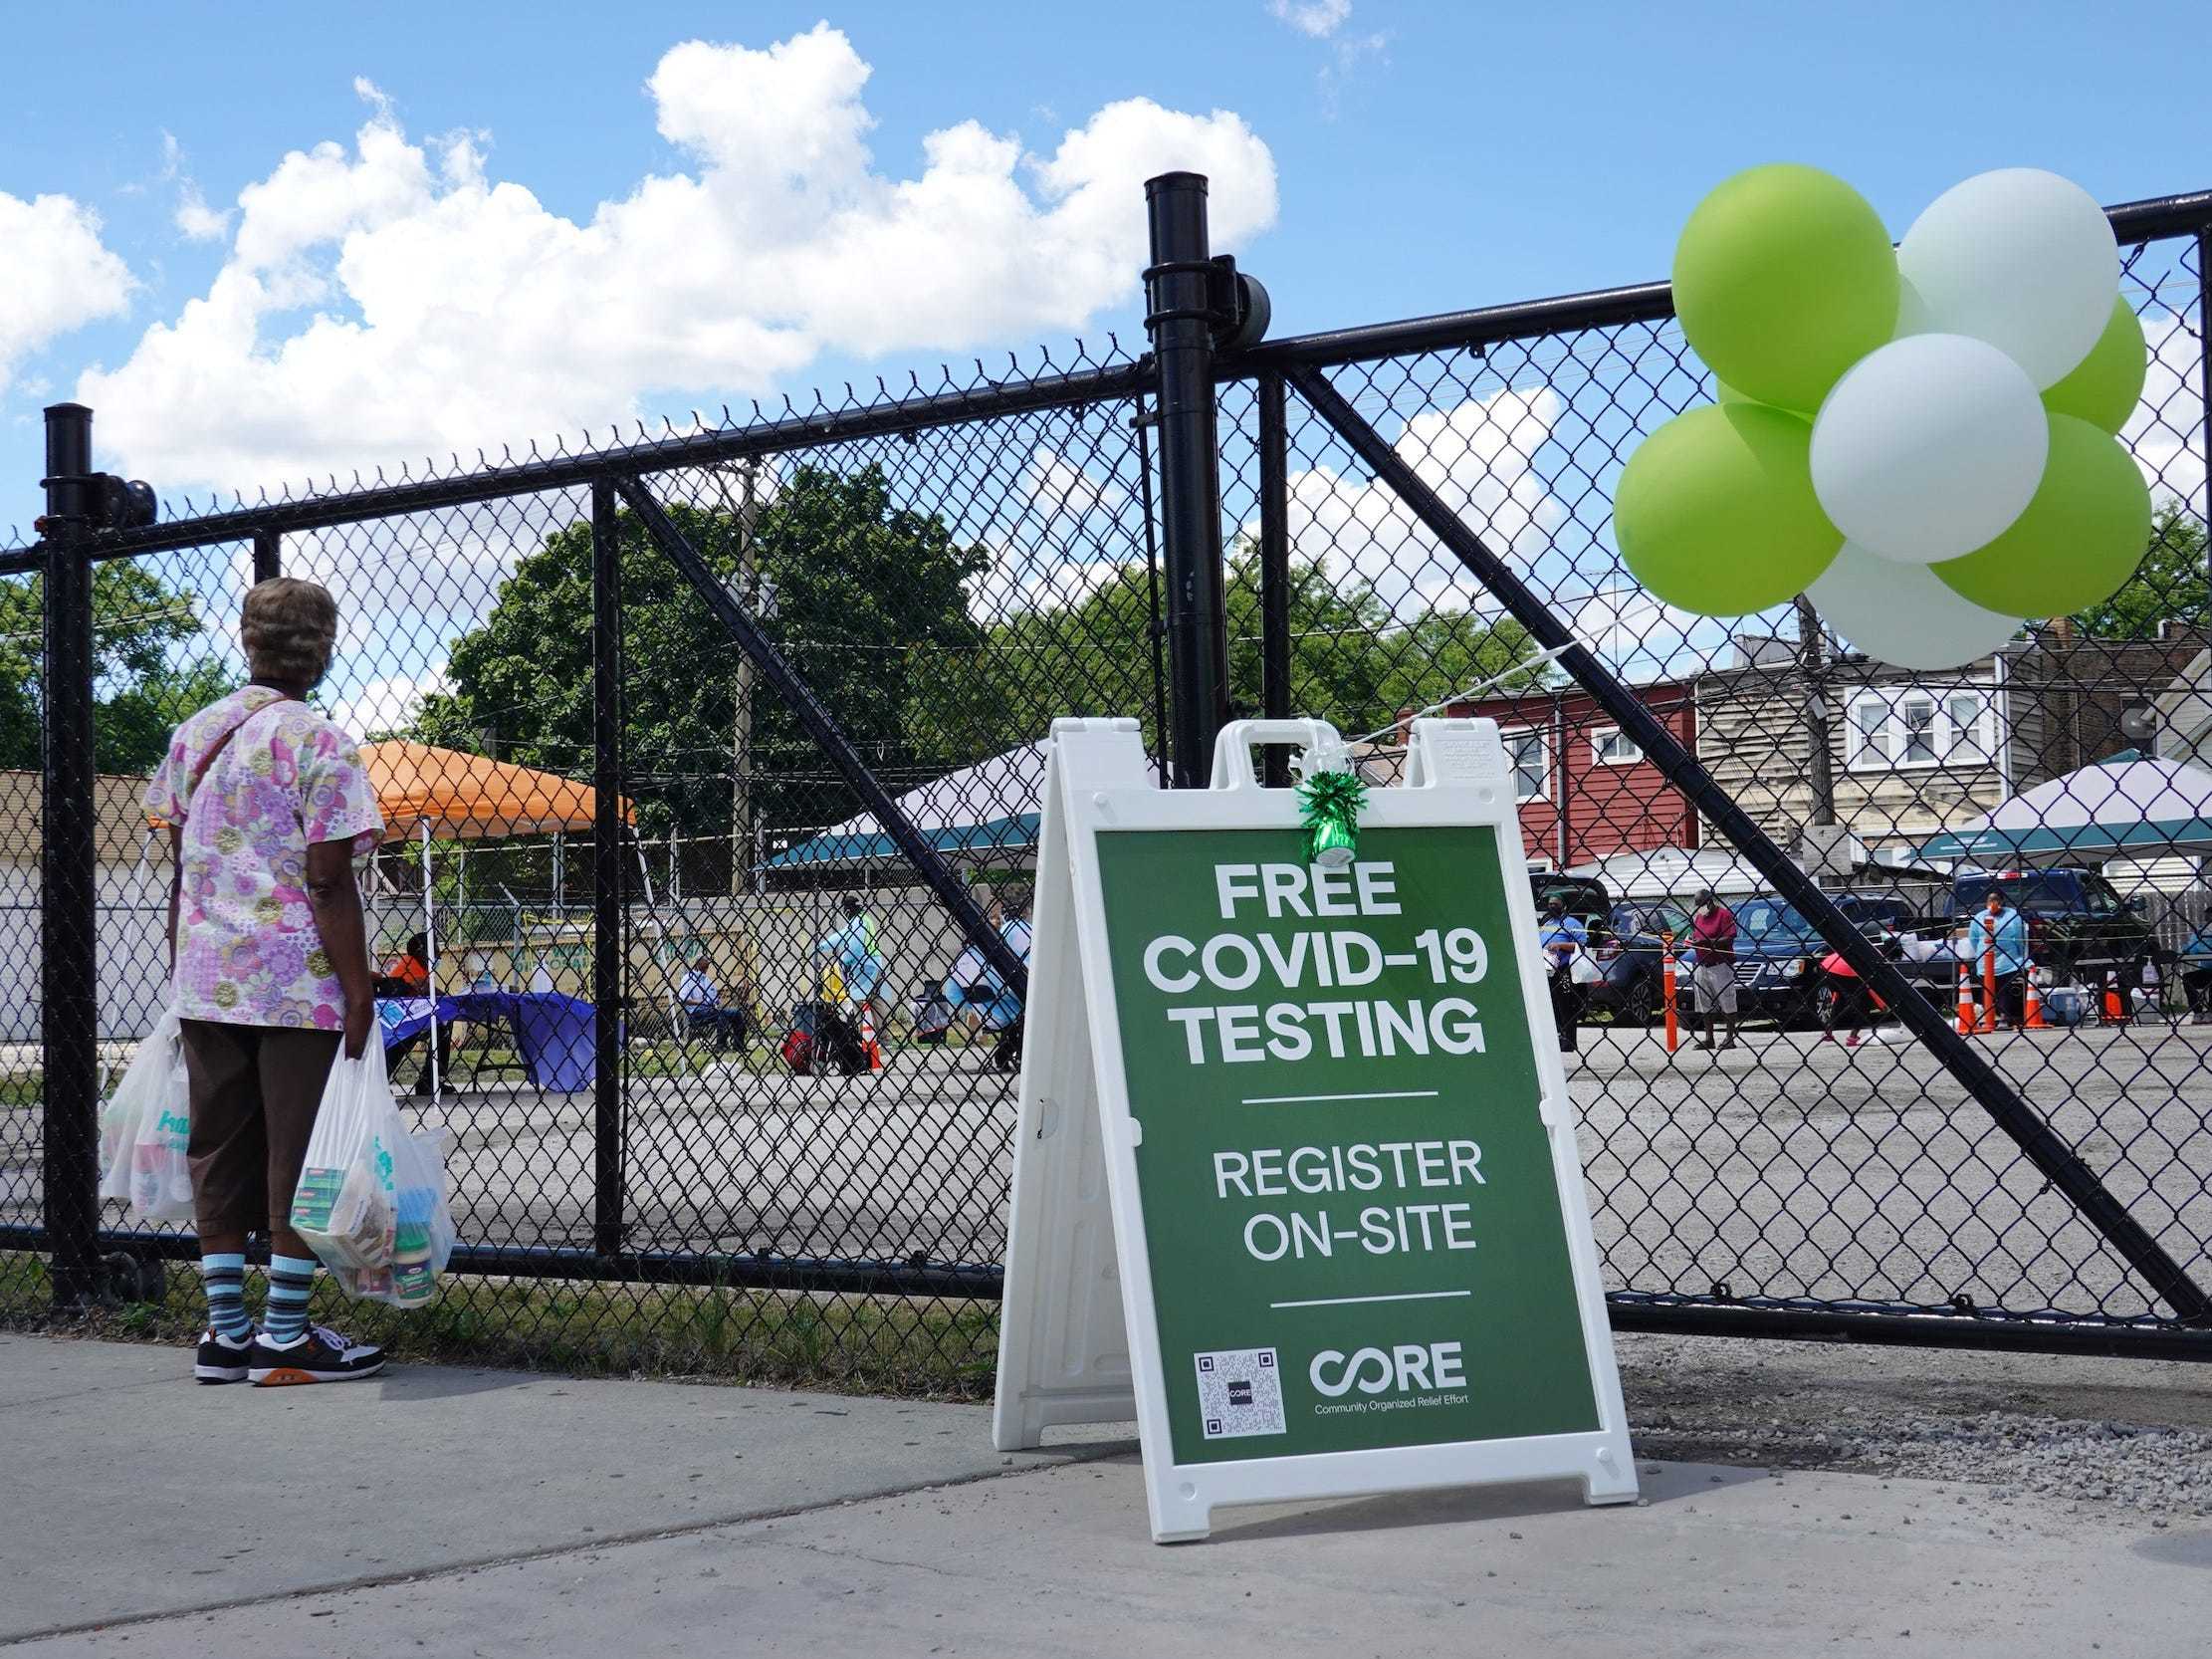 A sign alerts residents to a mobile COVID-19 testing site set up on a vacant lot in the Austin neighborhood on June 23, 2020 in Chicago, Illinois. The site is one of four mobile testing sites, two community-based sites and two first-responder-focused sites being implemented by the city.